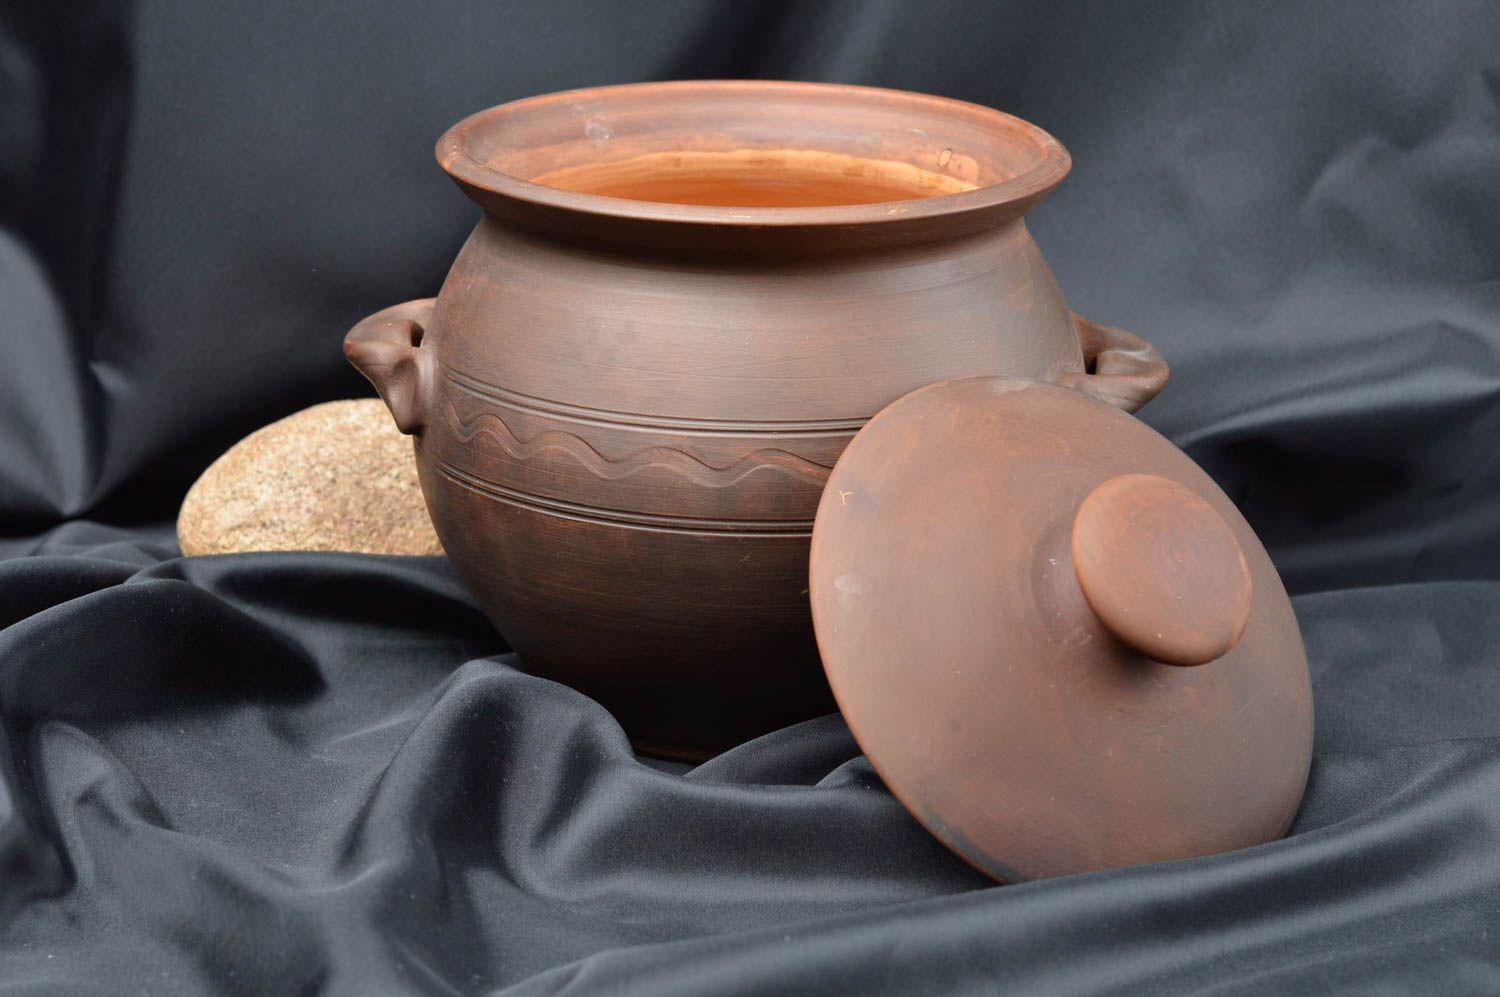 15 oz clay cooking pot for oven with lid 3,5 lb photo 1